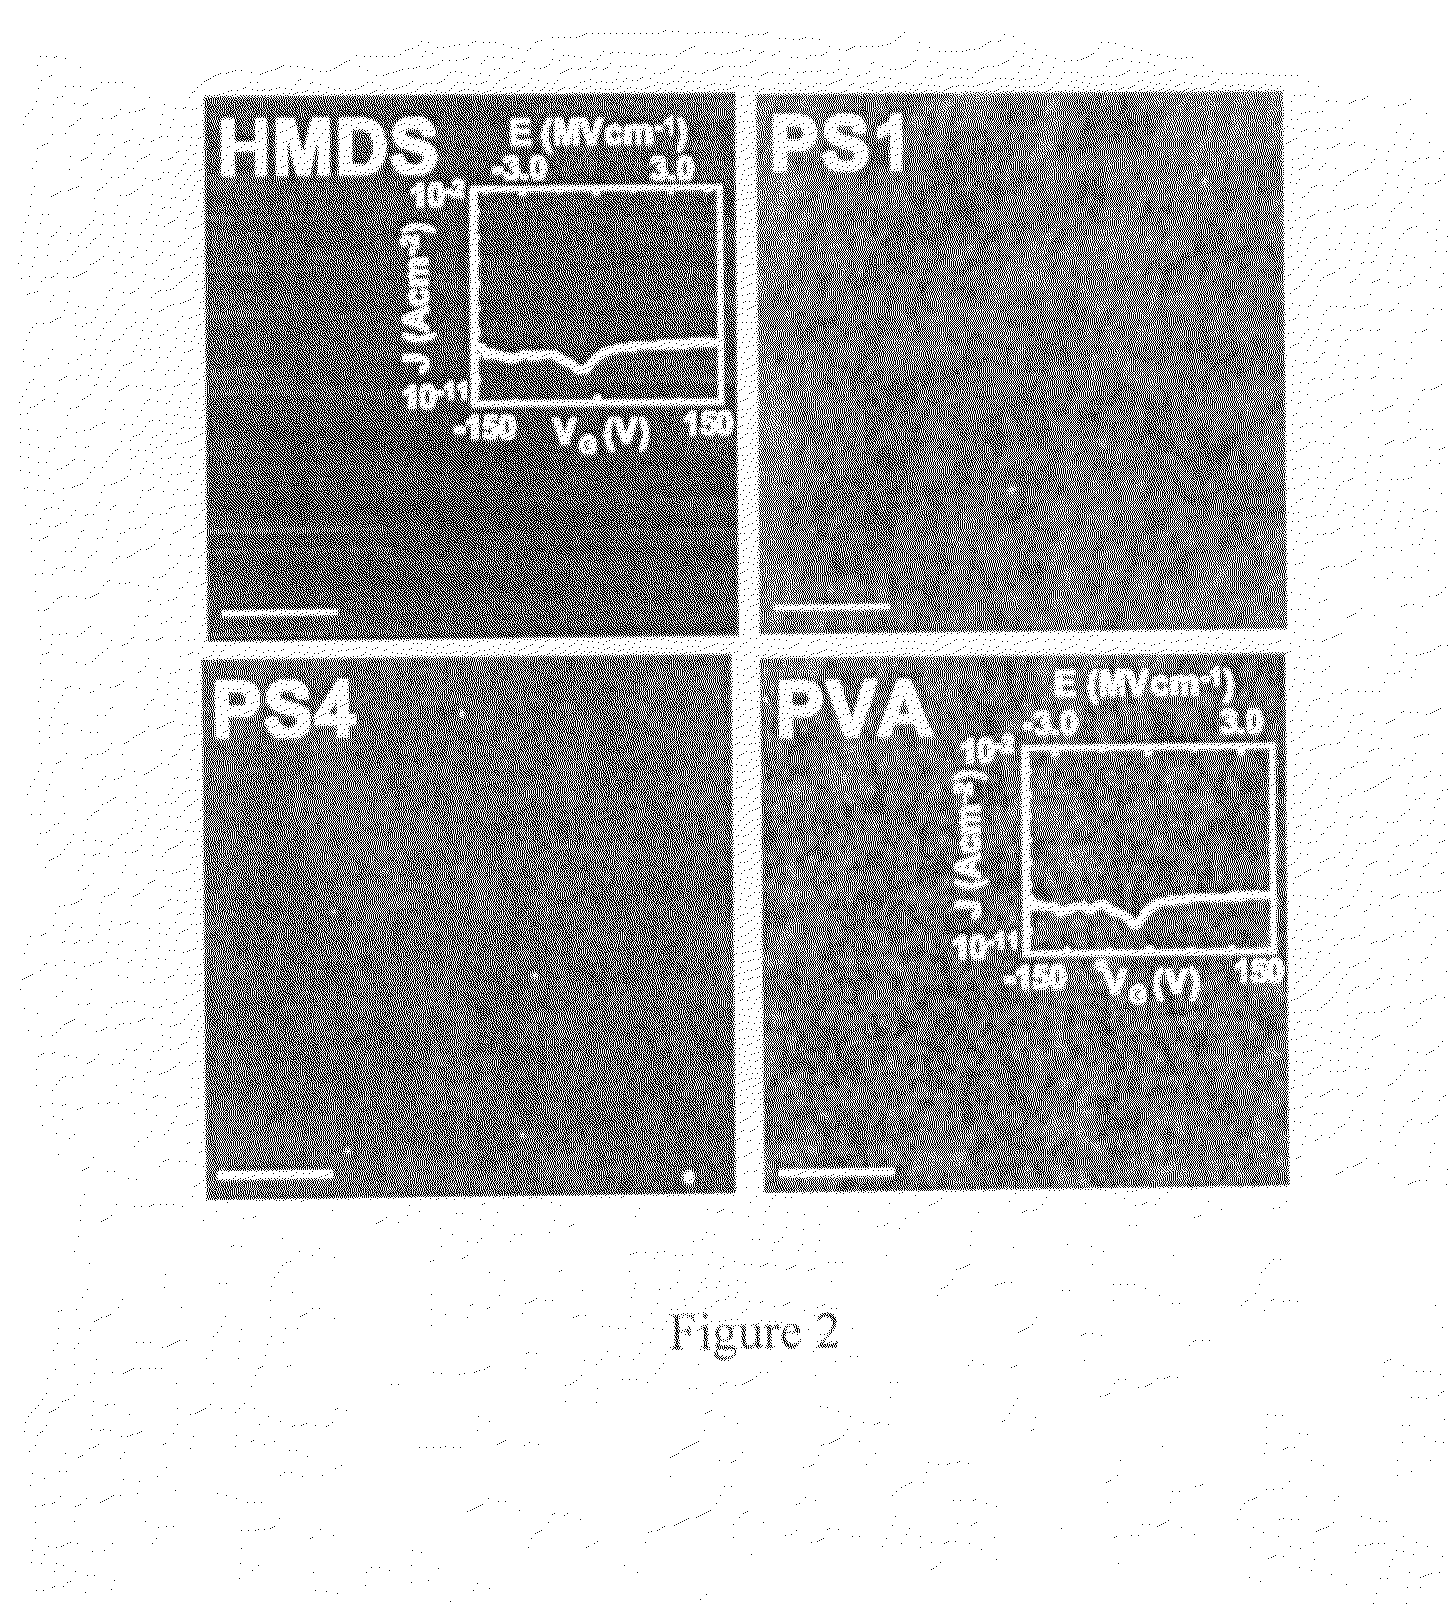 Gate dielectric structures, organic semiconductors, thin film transistors and related methods